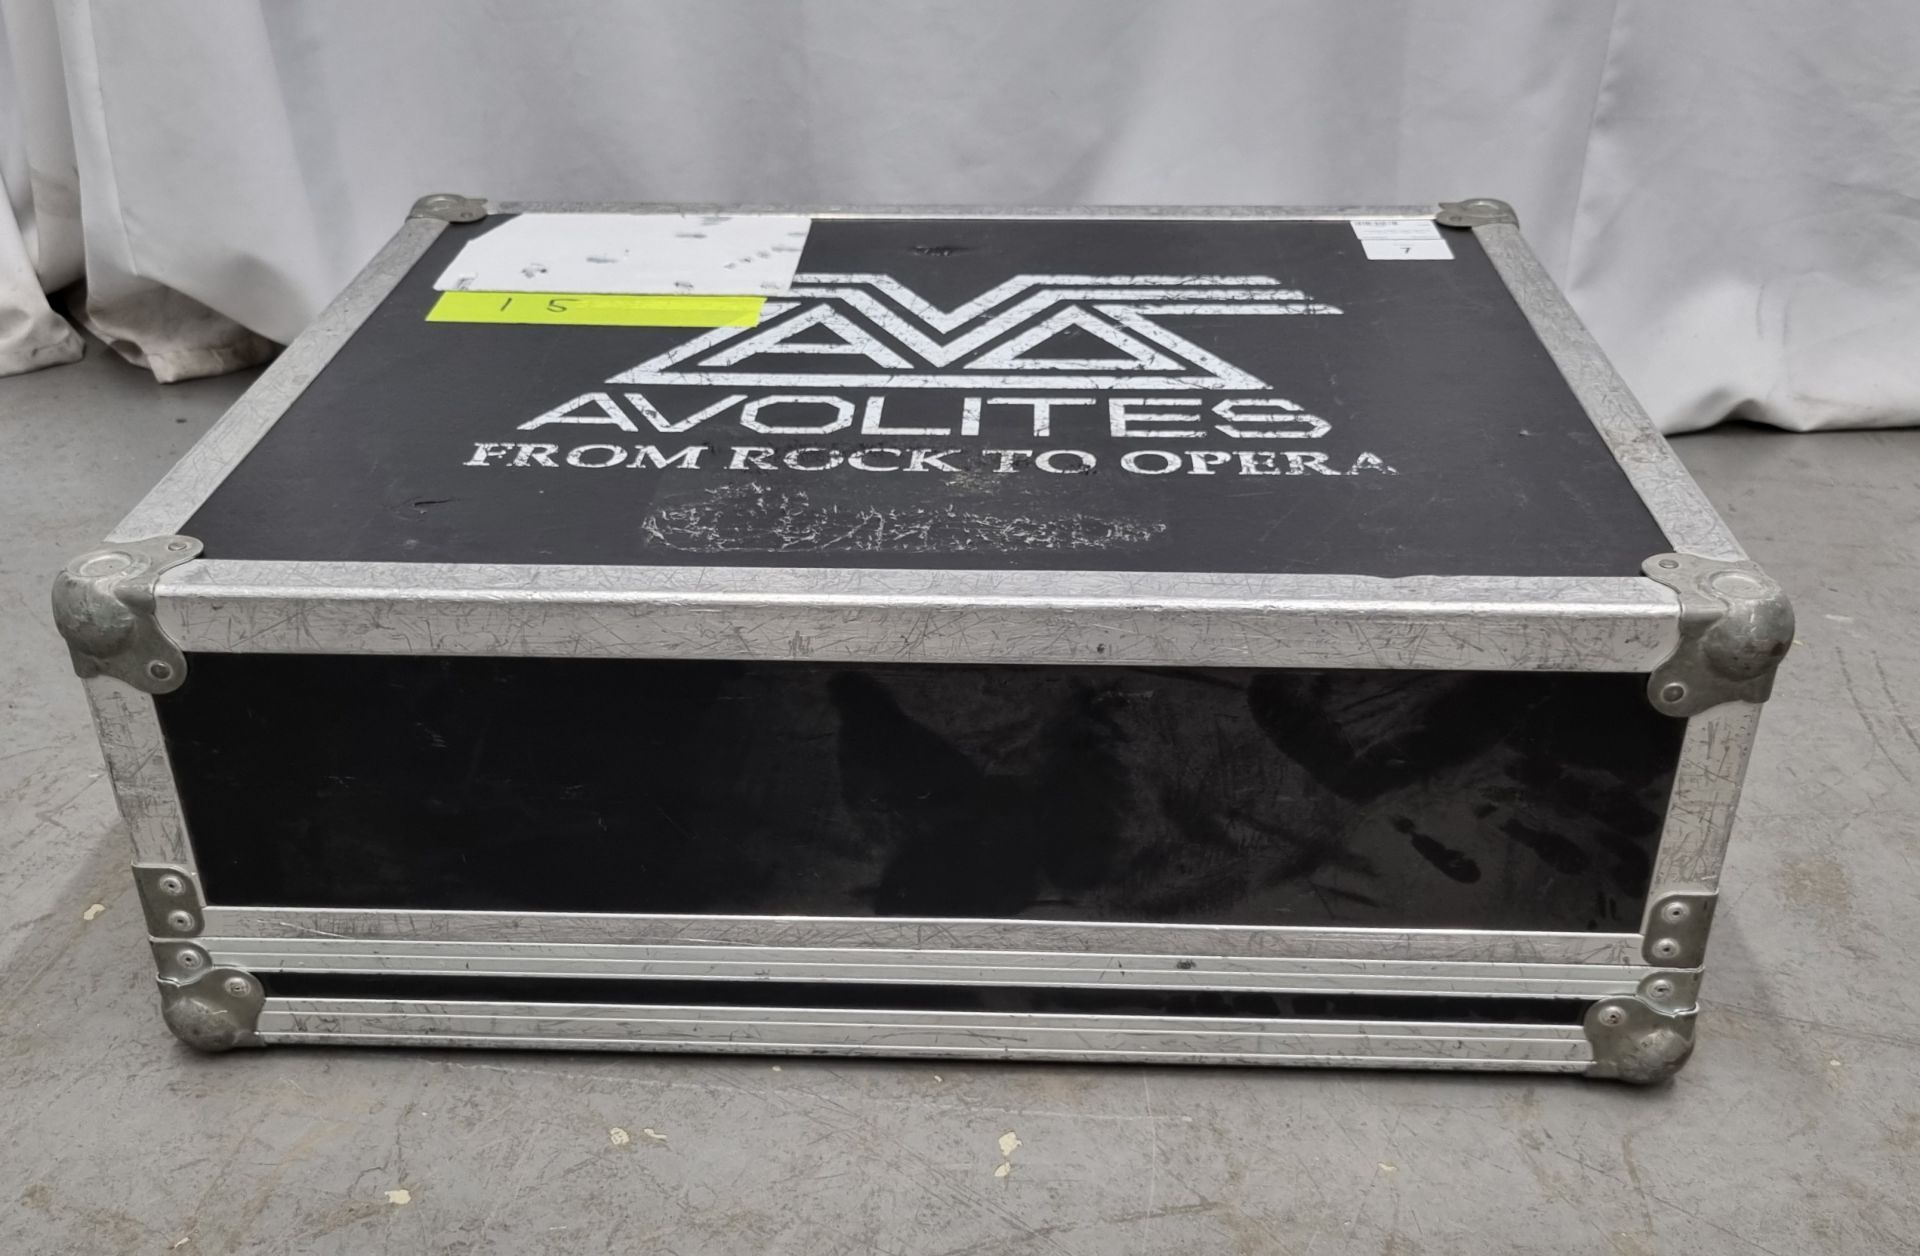 Avolites Pearl Tiger lighting console with flight case - Image 10 of 10